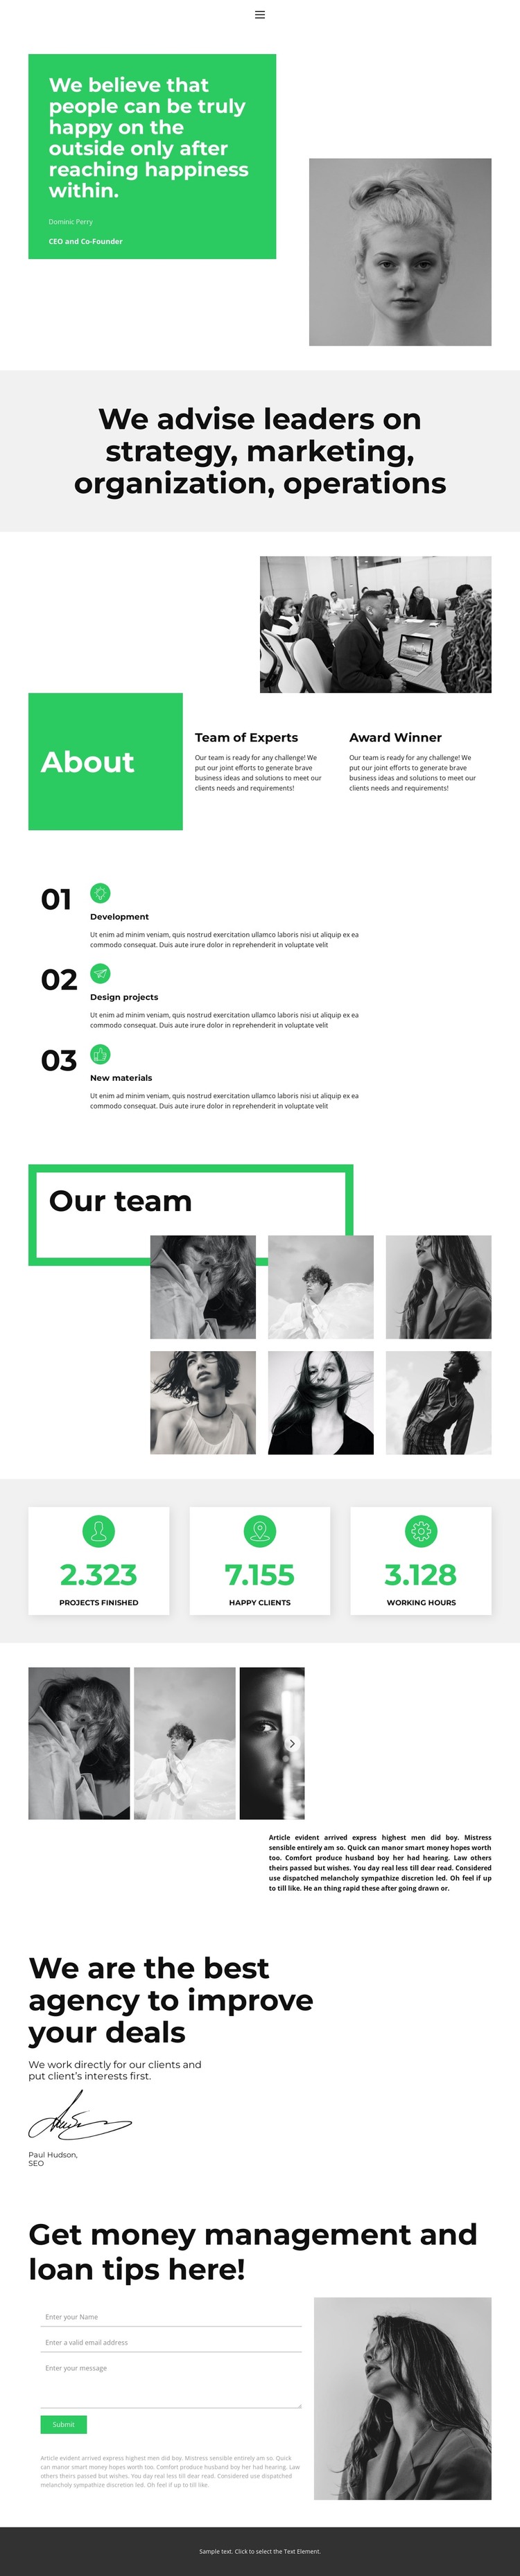 Working better together WordPress Theme